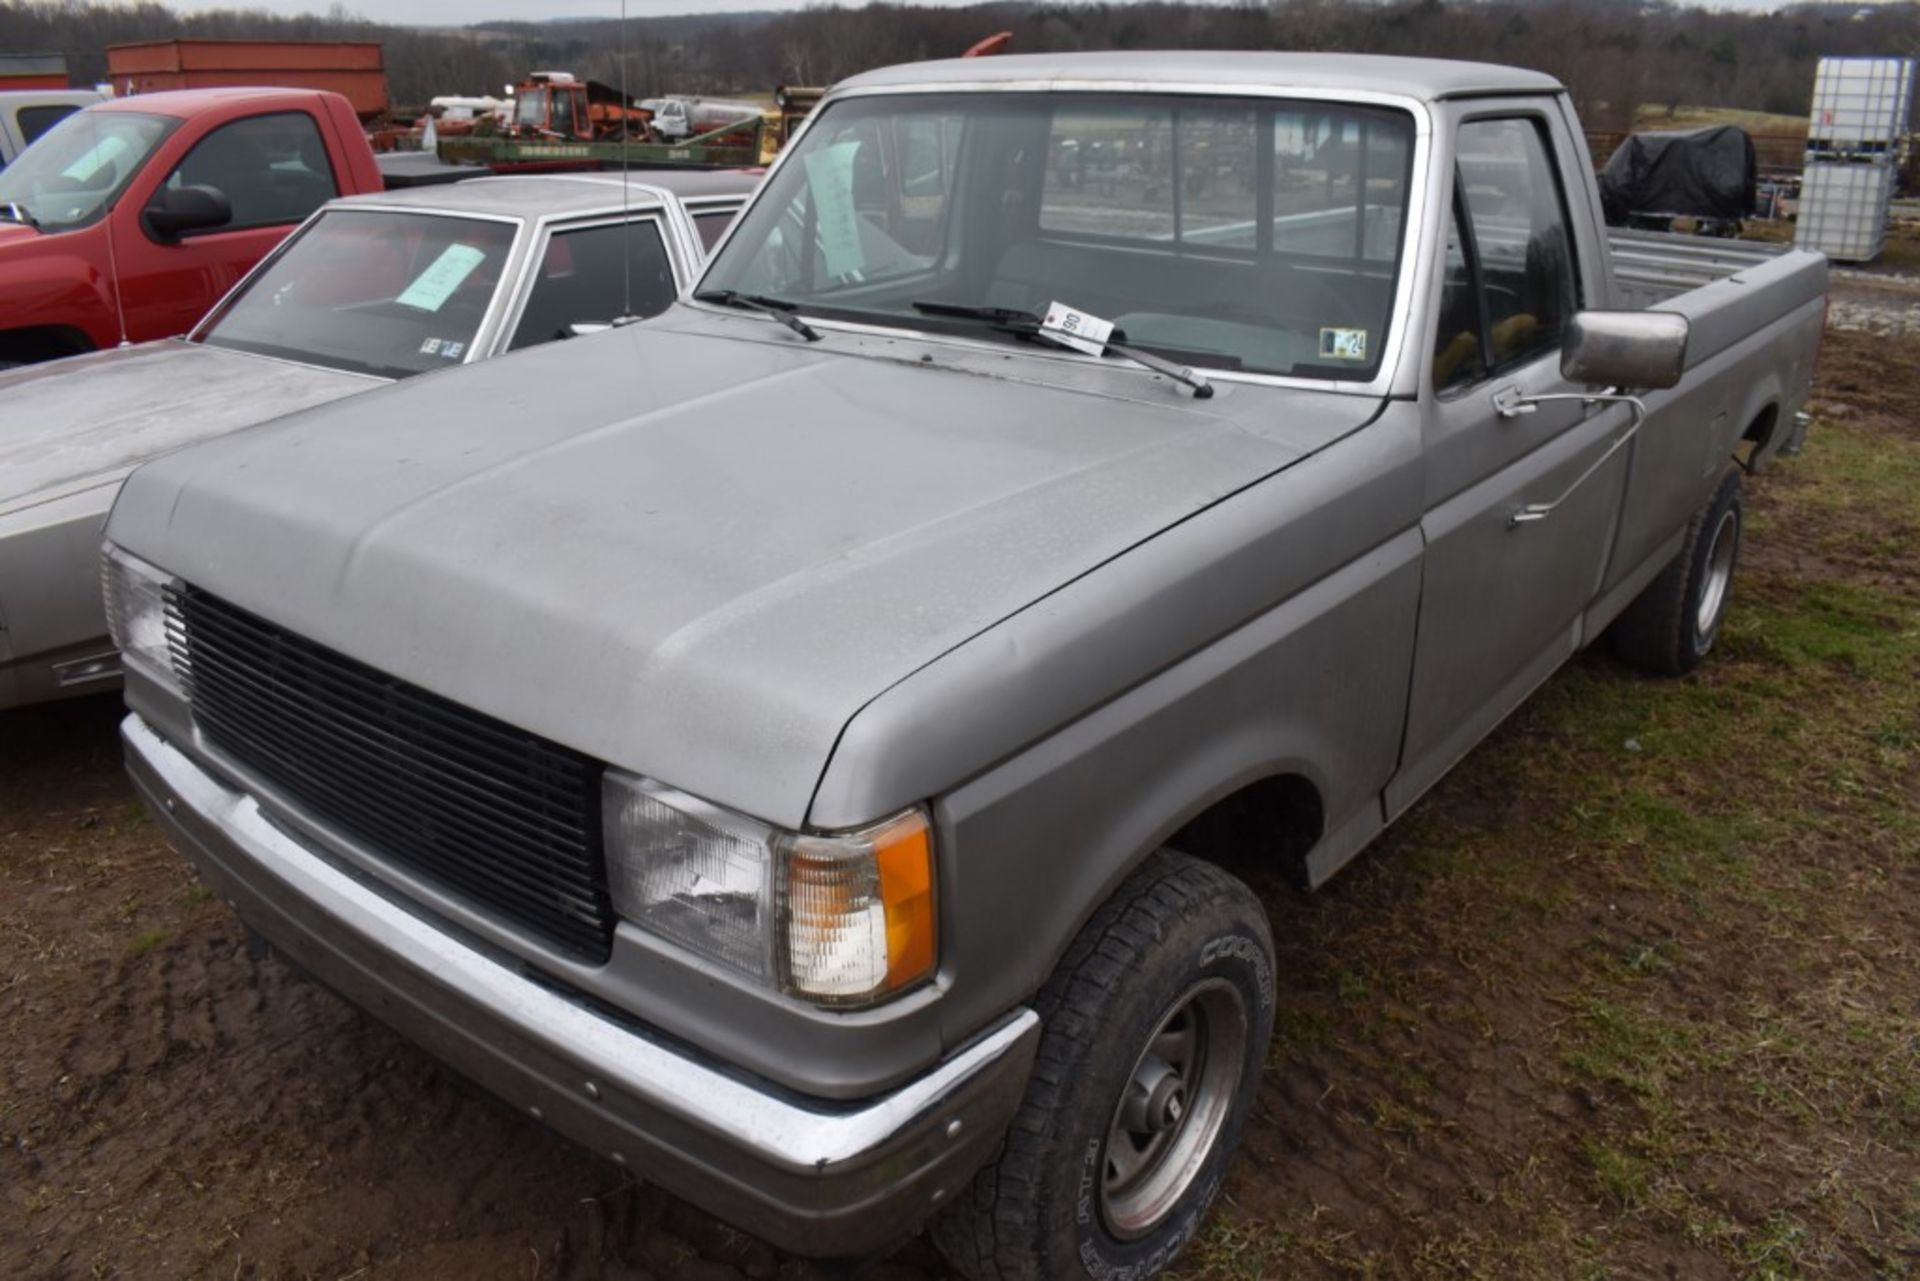 1987 Ford F-150 Truck - Image 5 of 36